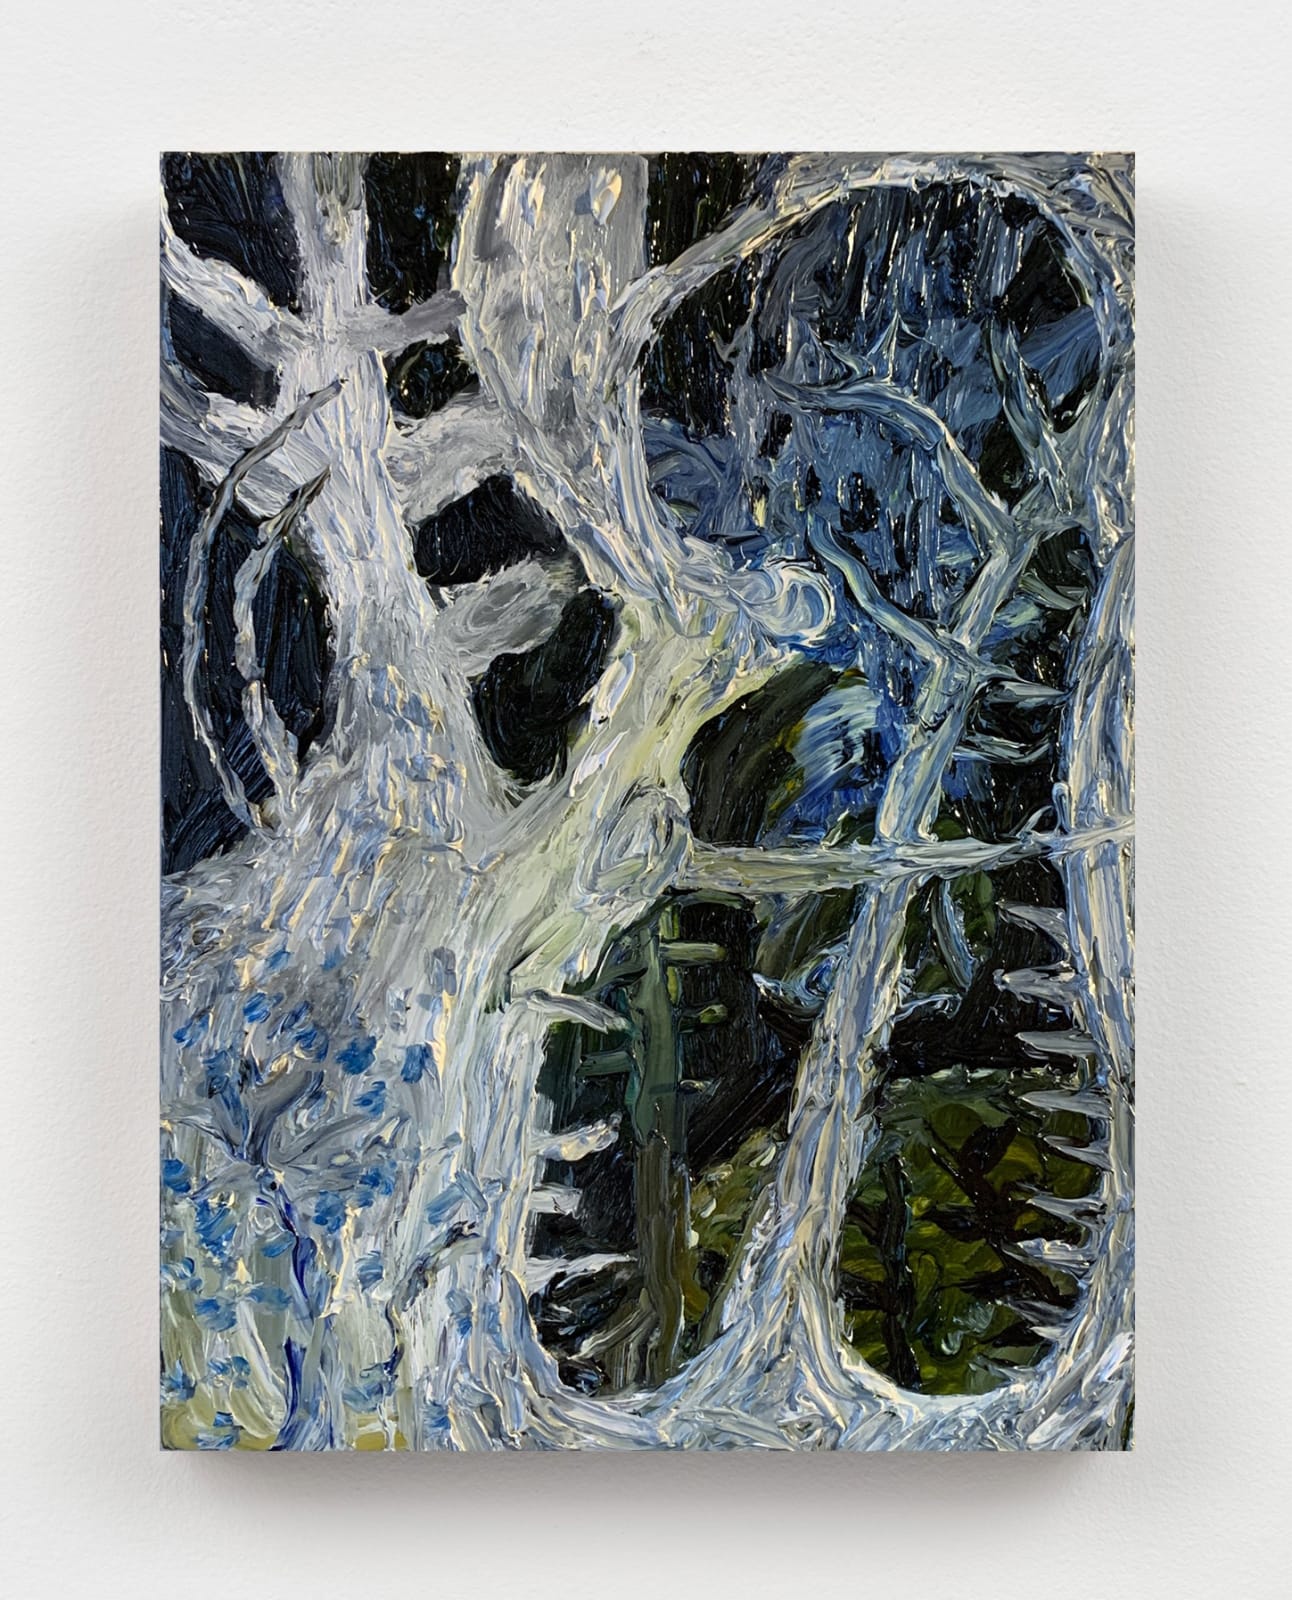 Thicket #3, 2021 Oil on wood panel 8 x 6 in. (20.3 x 15.2 cm.) (ML 28) $3,200